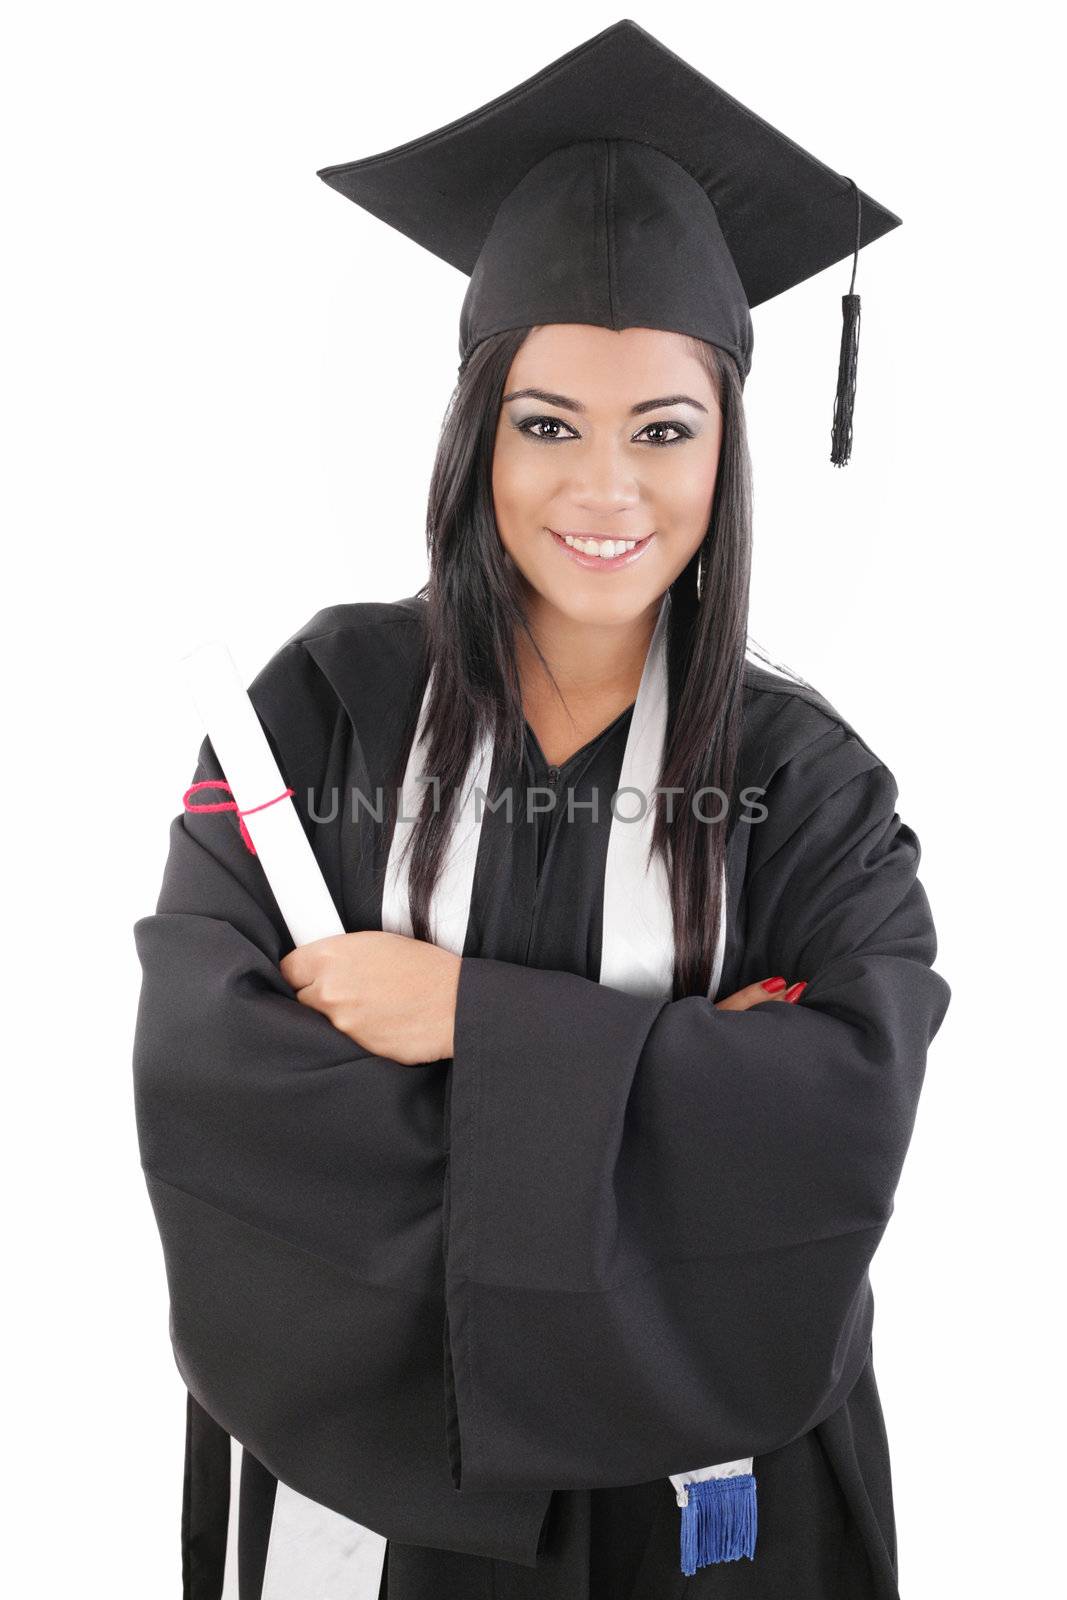 graduation woman portrait smiling and looking happy